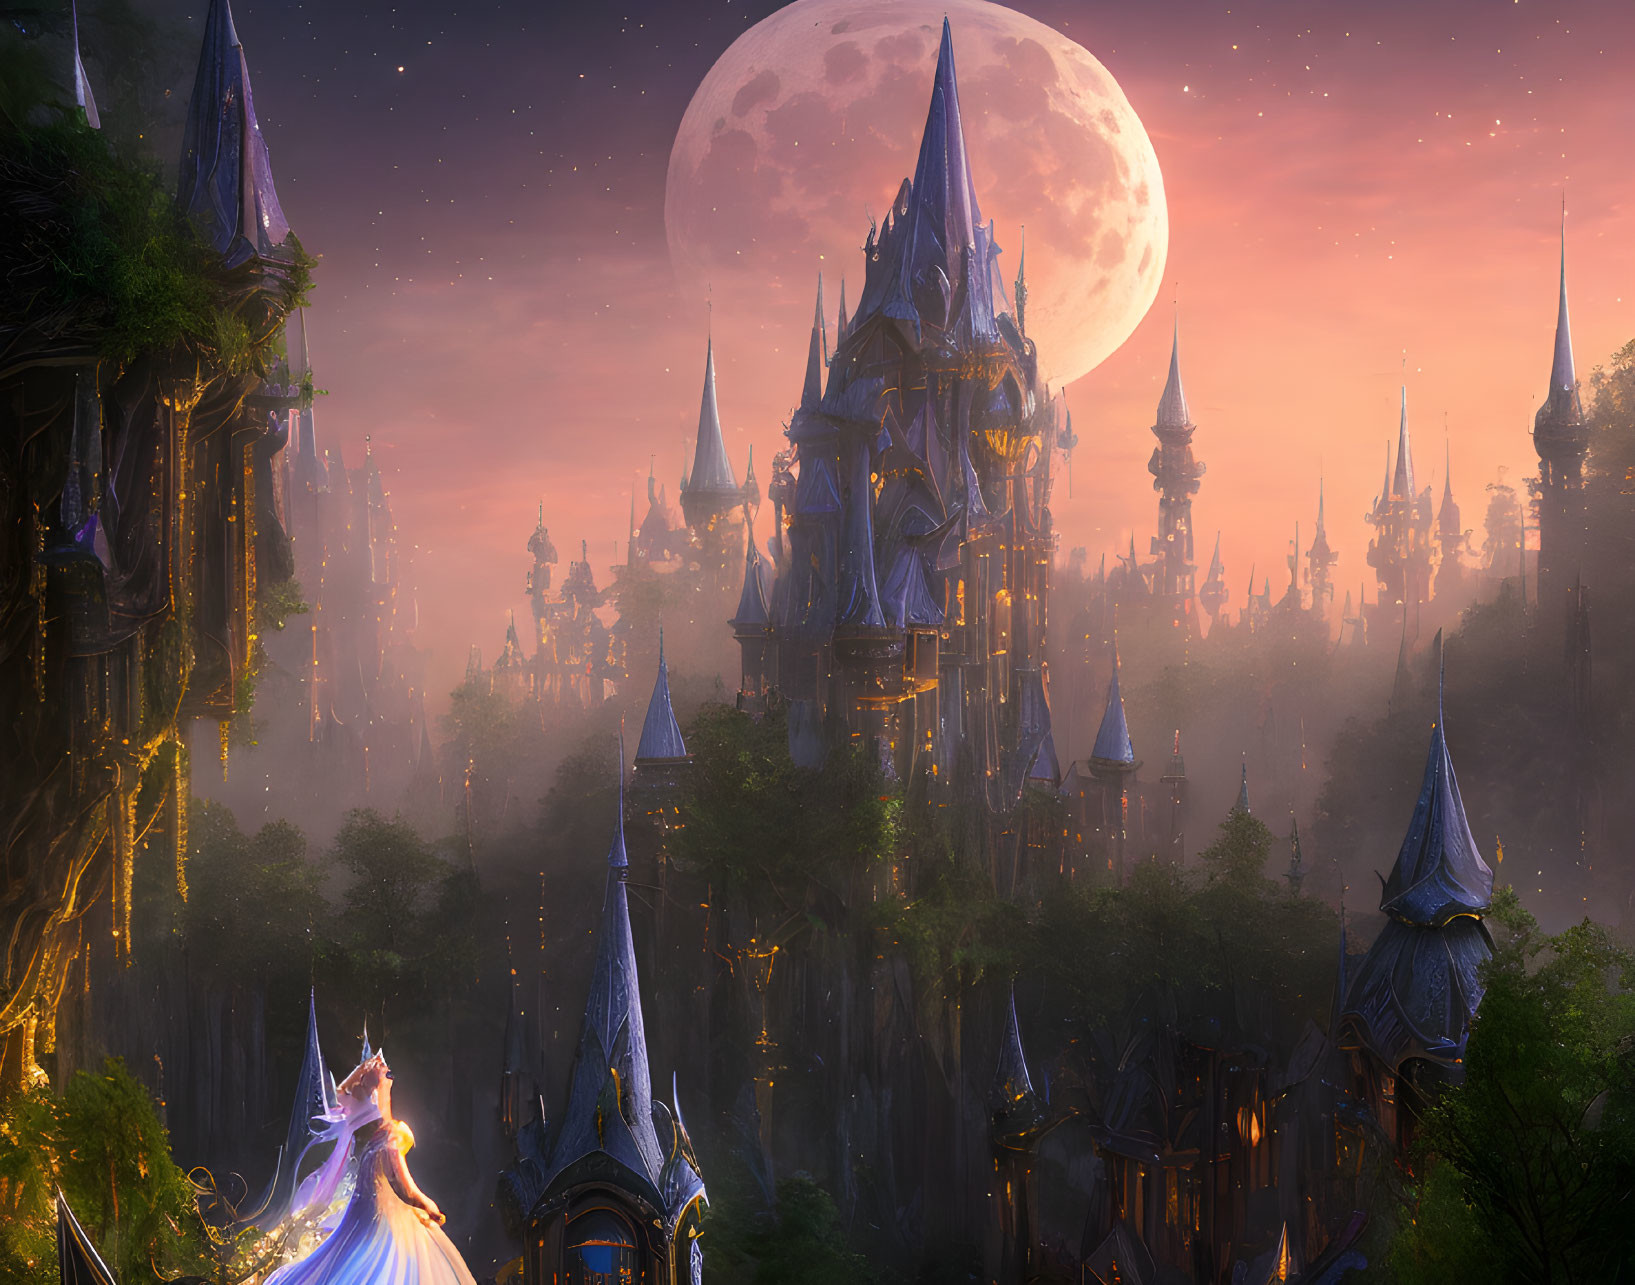 Fantastical castle with spires under large moon in twilight forest